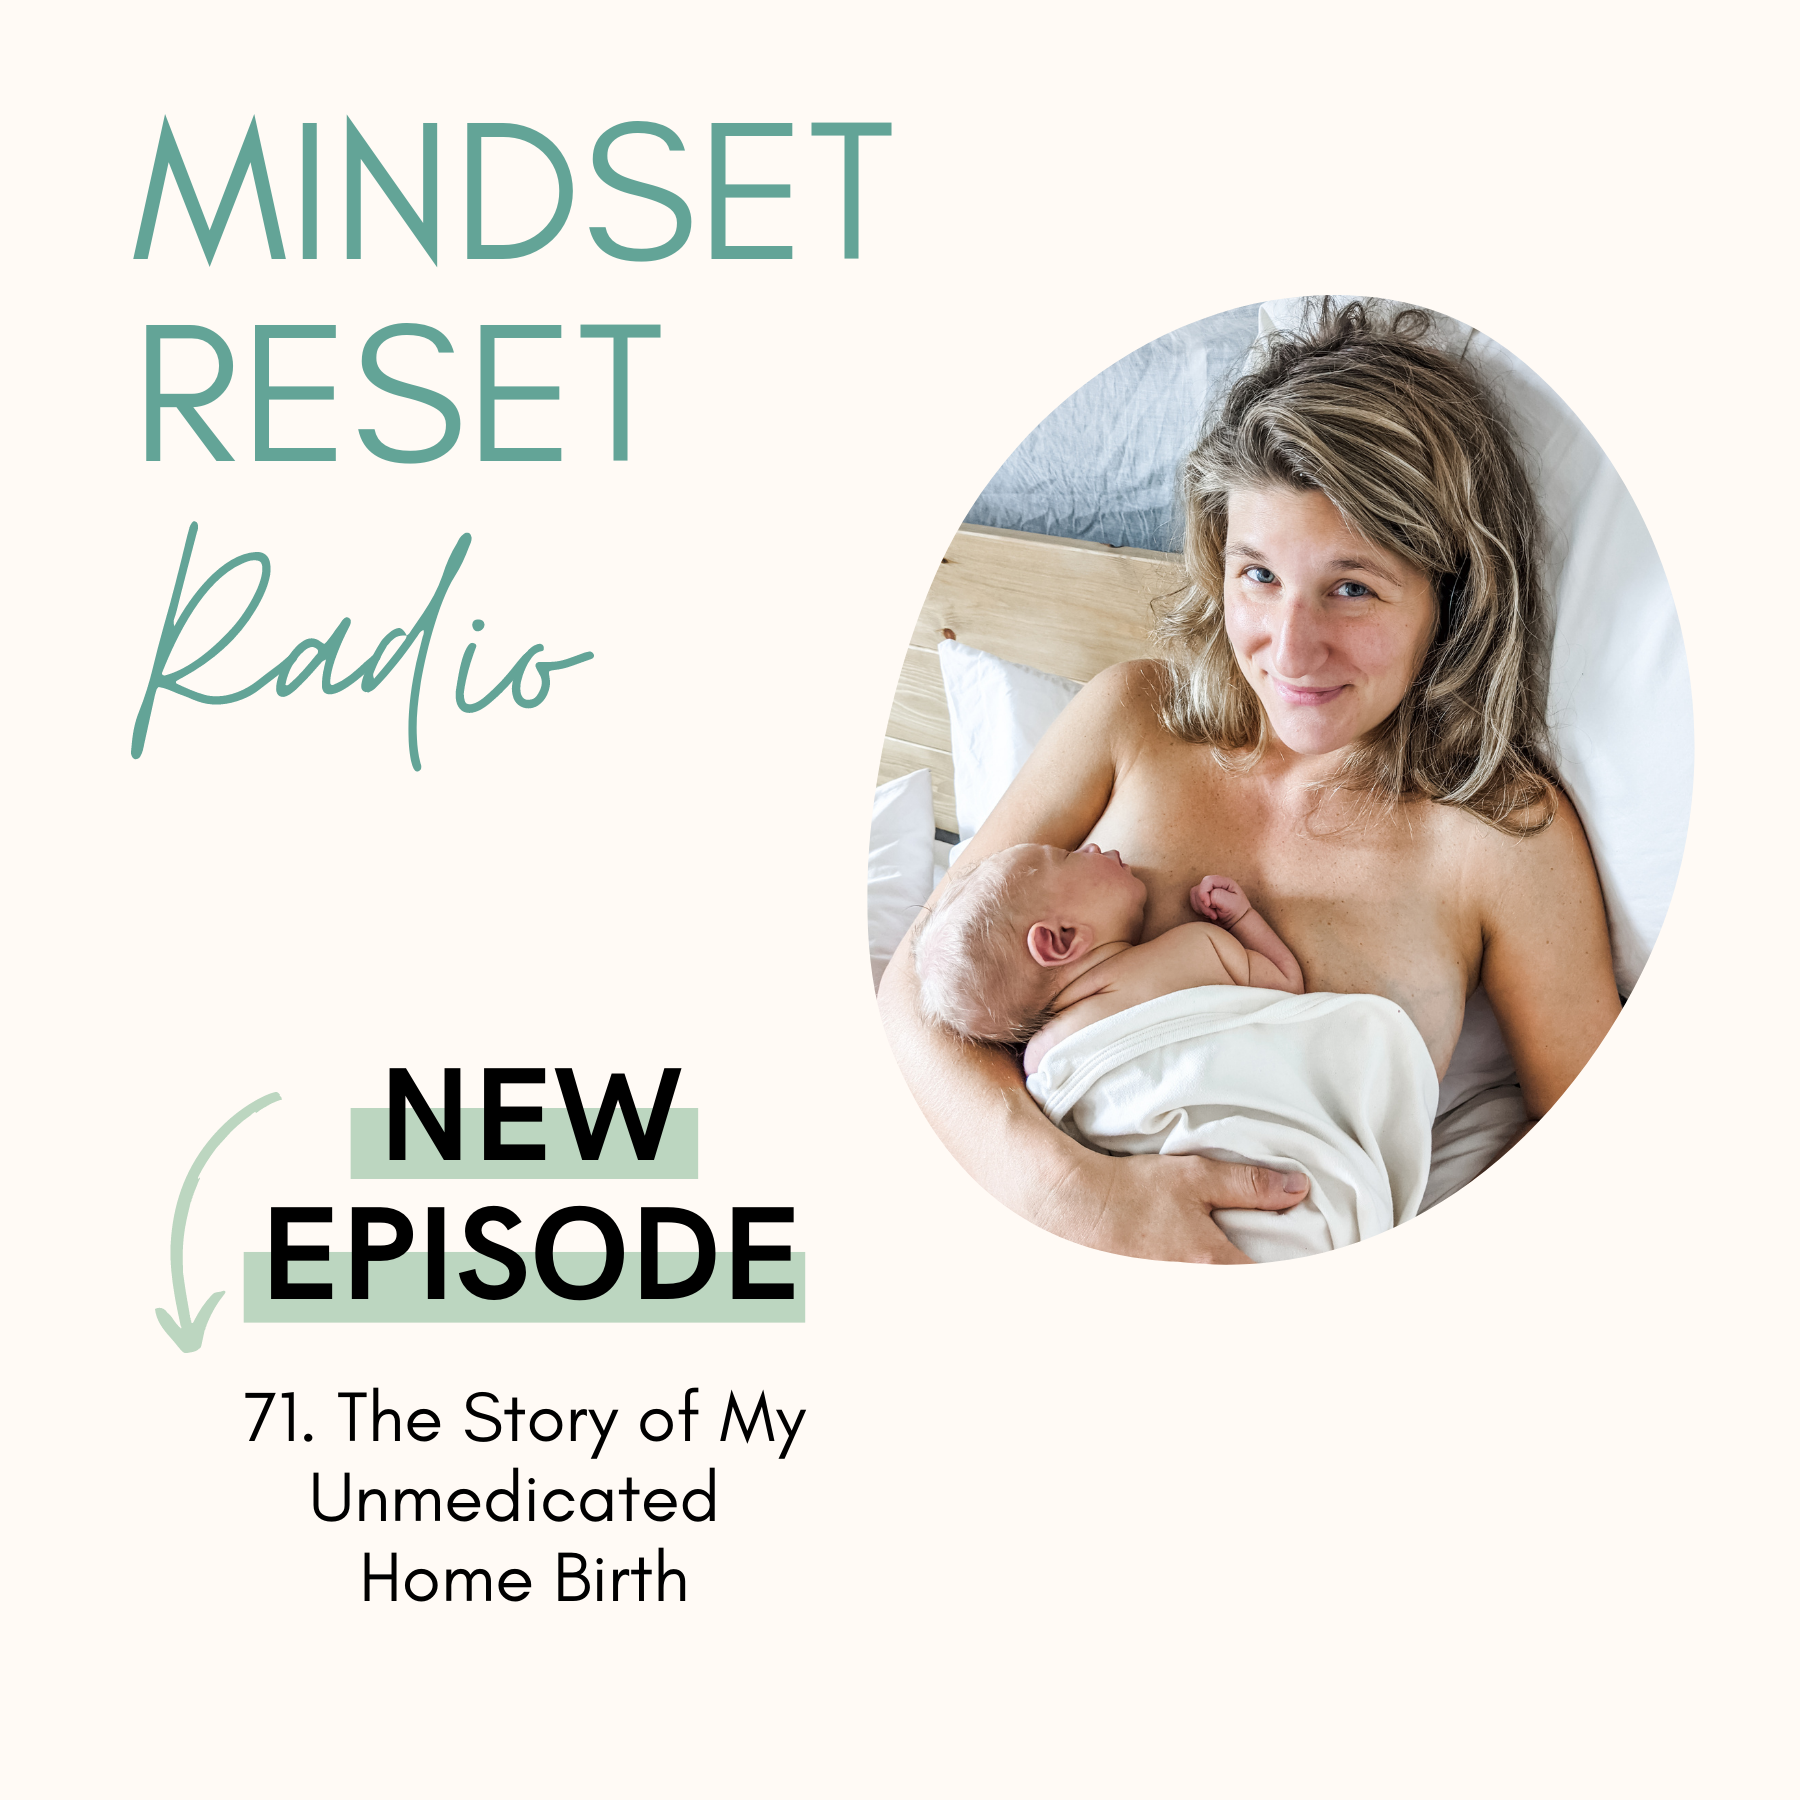 71. Let's chat about my birth story—an unmedicated home birth